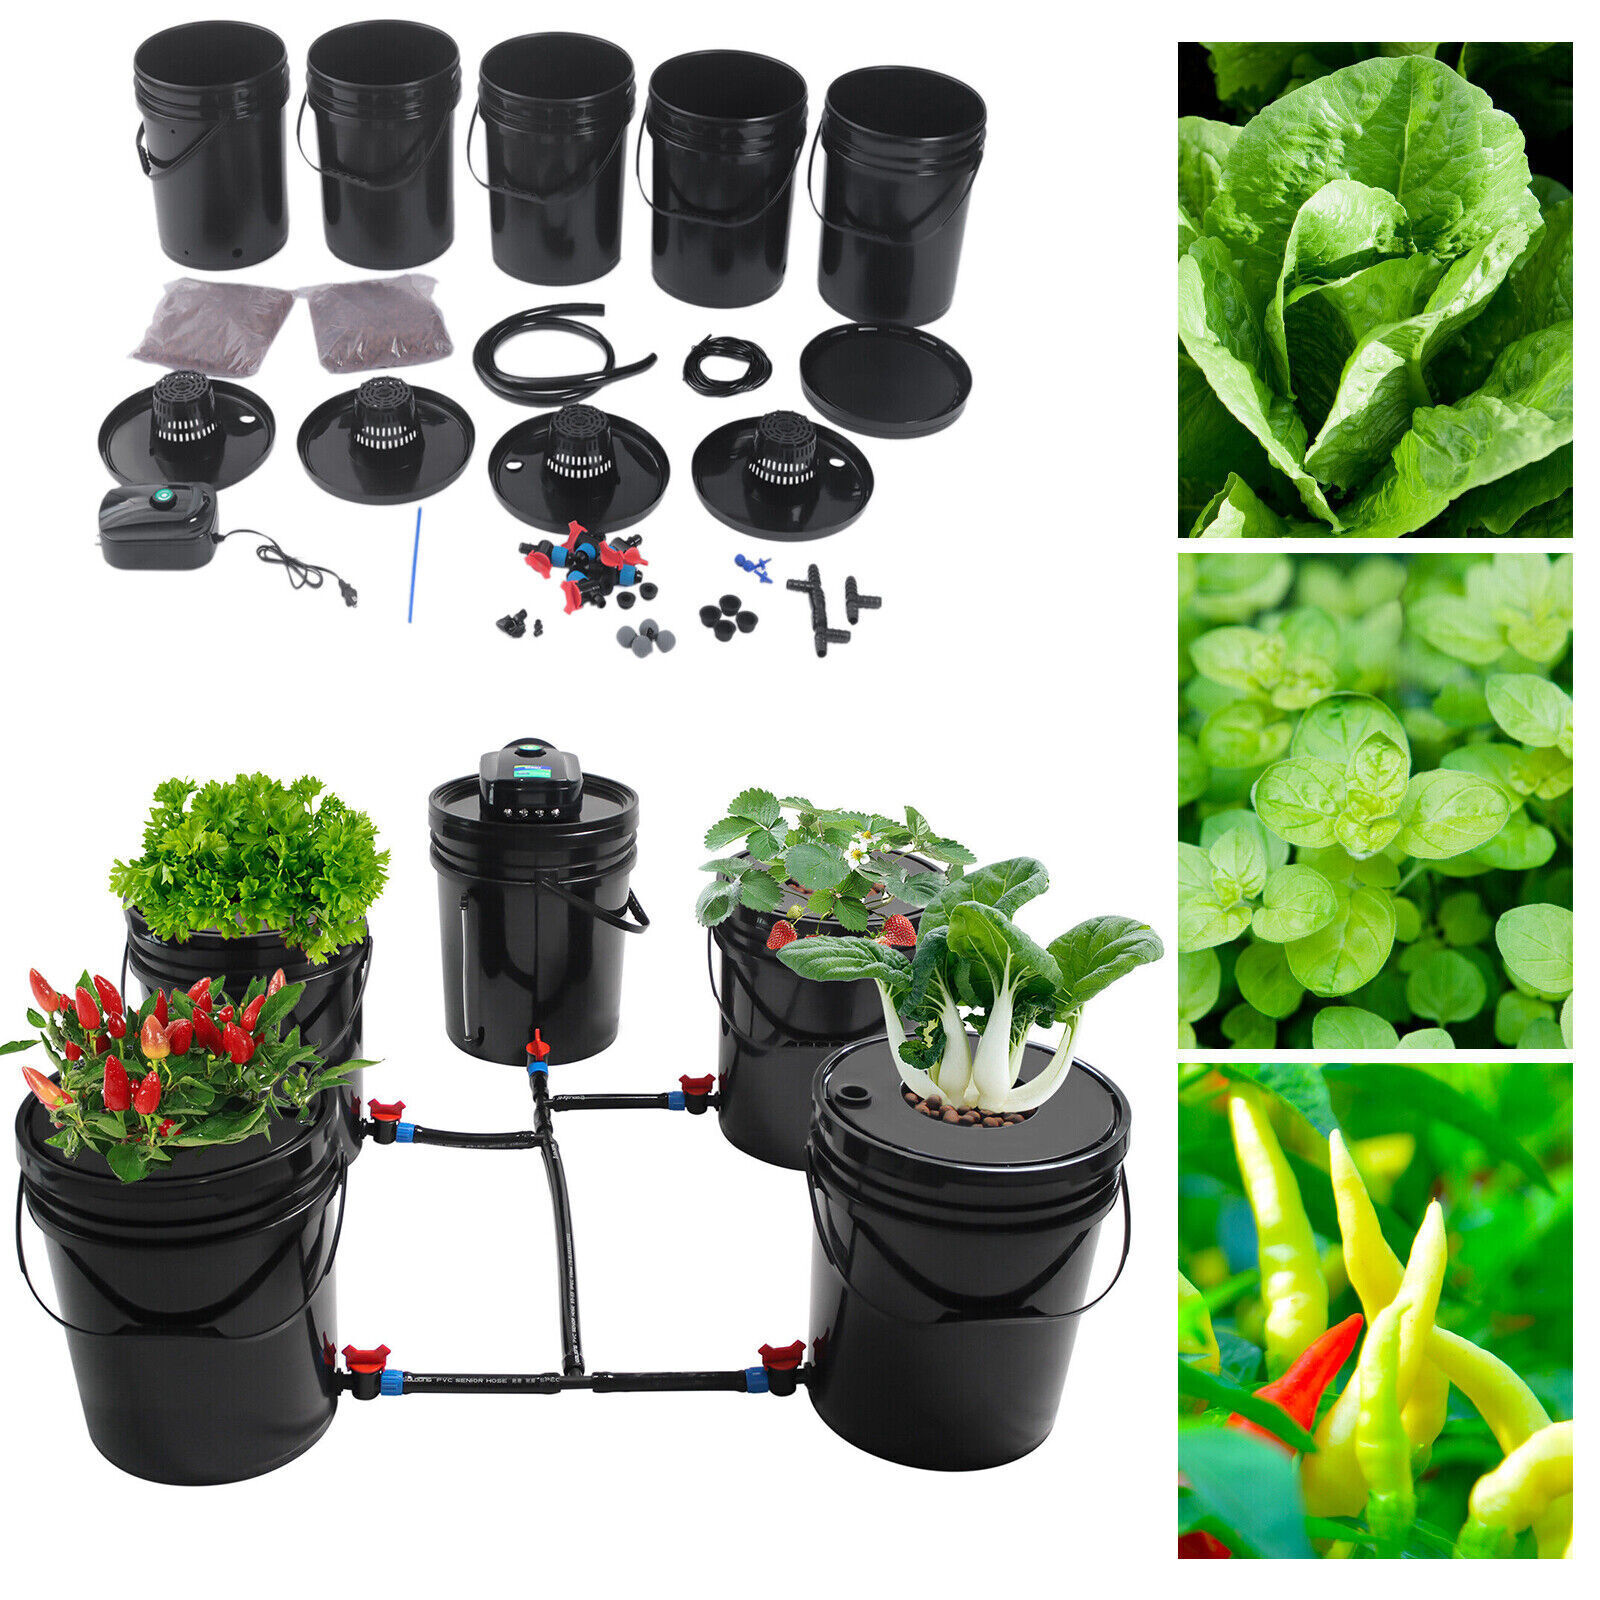 Set of 5 Deep Water 5 Gallon Culture DWC Hydroponic Grow System Kit Round Bucket